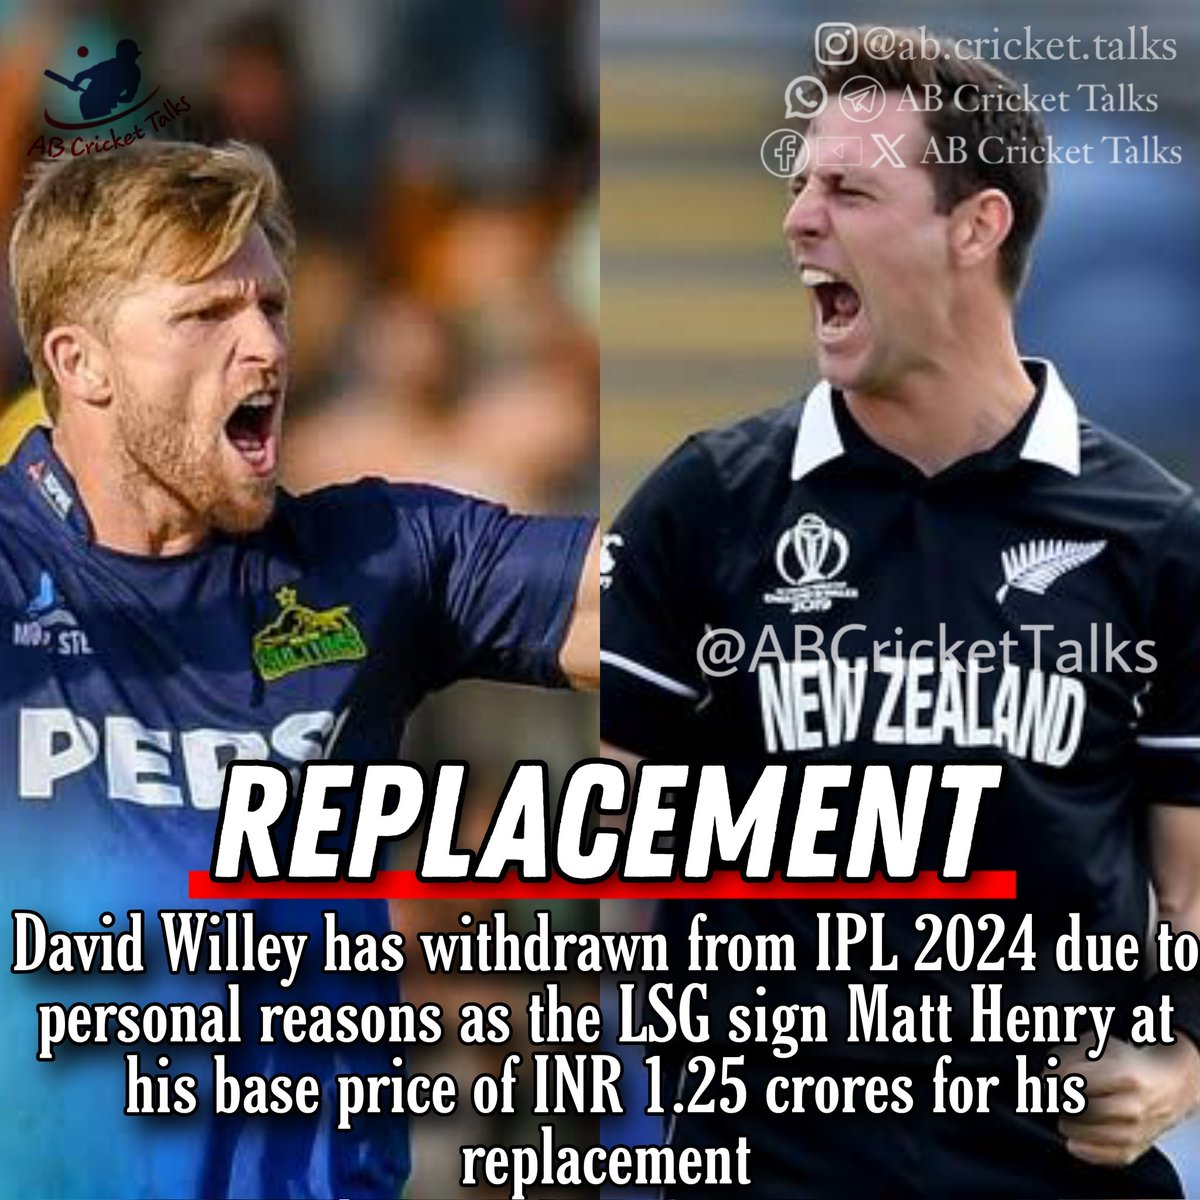 David Willey will going to replace by Matt Henry in the LSG Squad
#ABCricketTalks #CricketTalksWithArpit